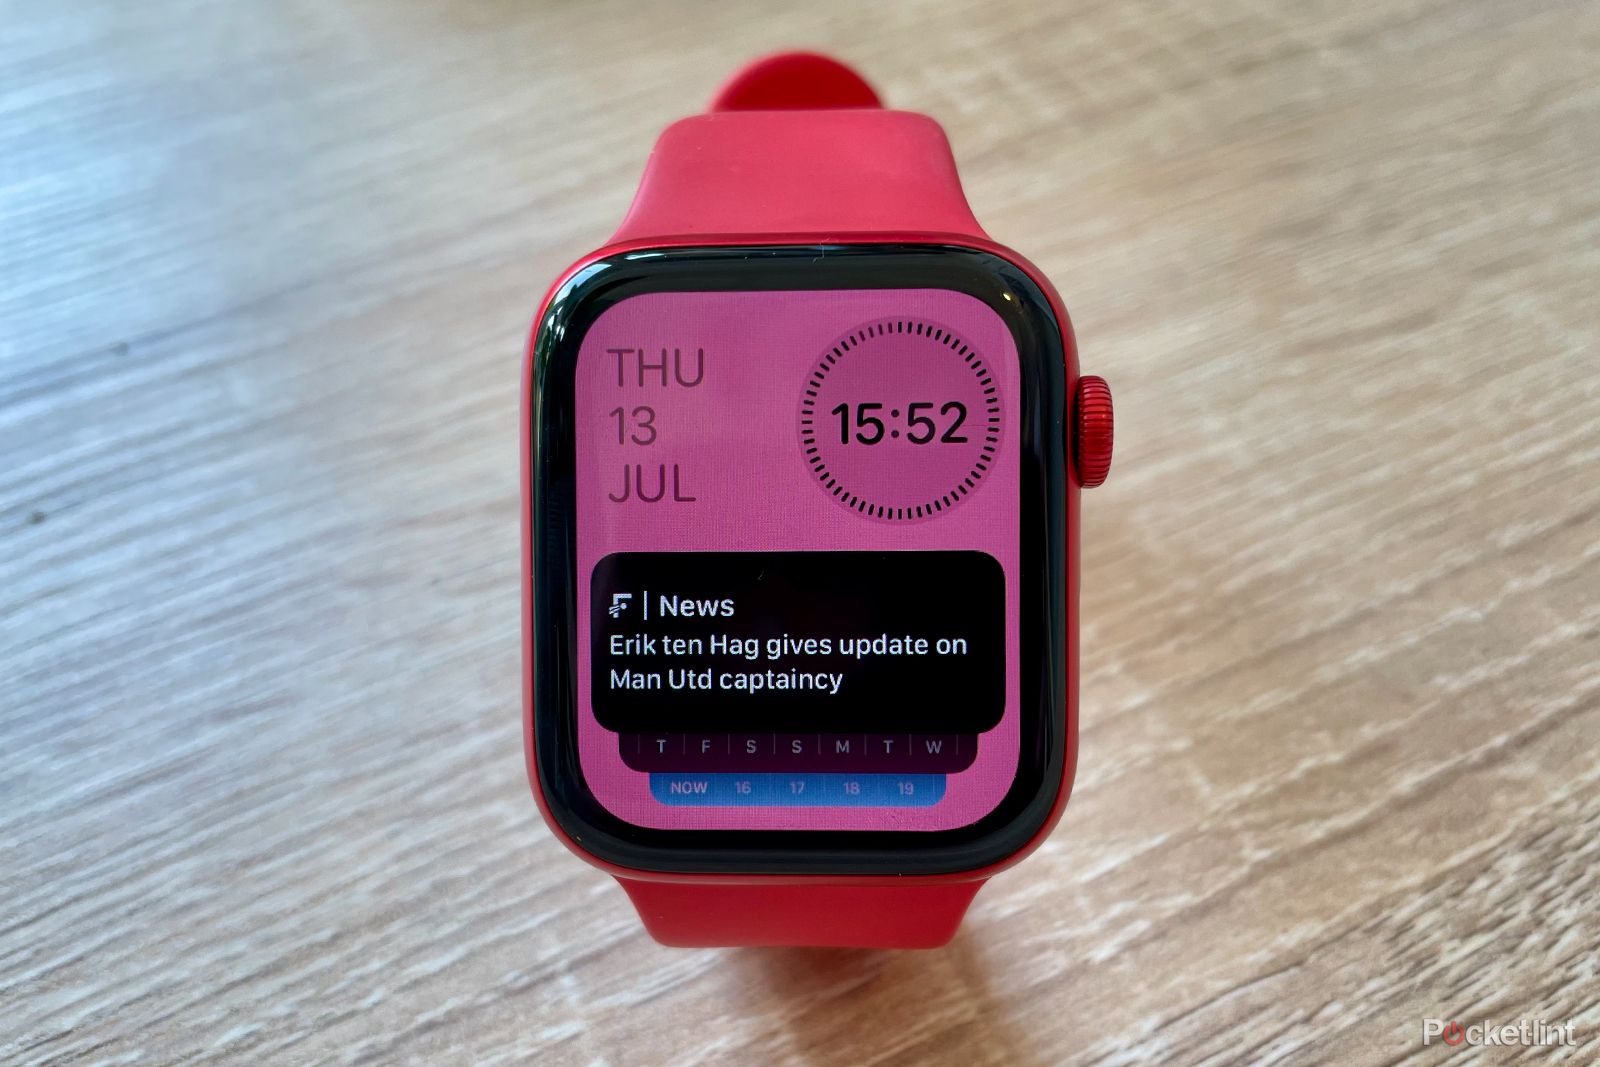 How to add and use widgets on Apple Watch